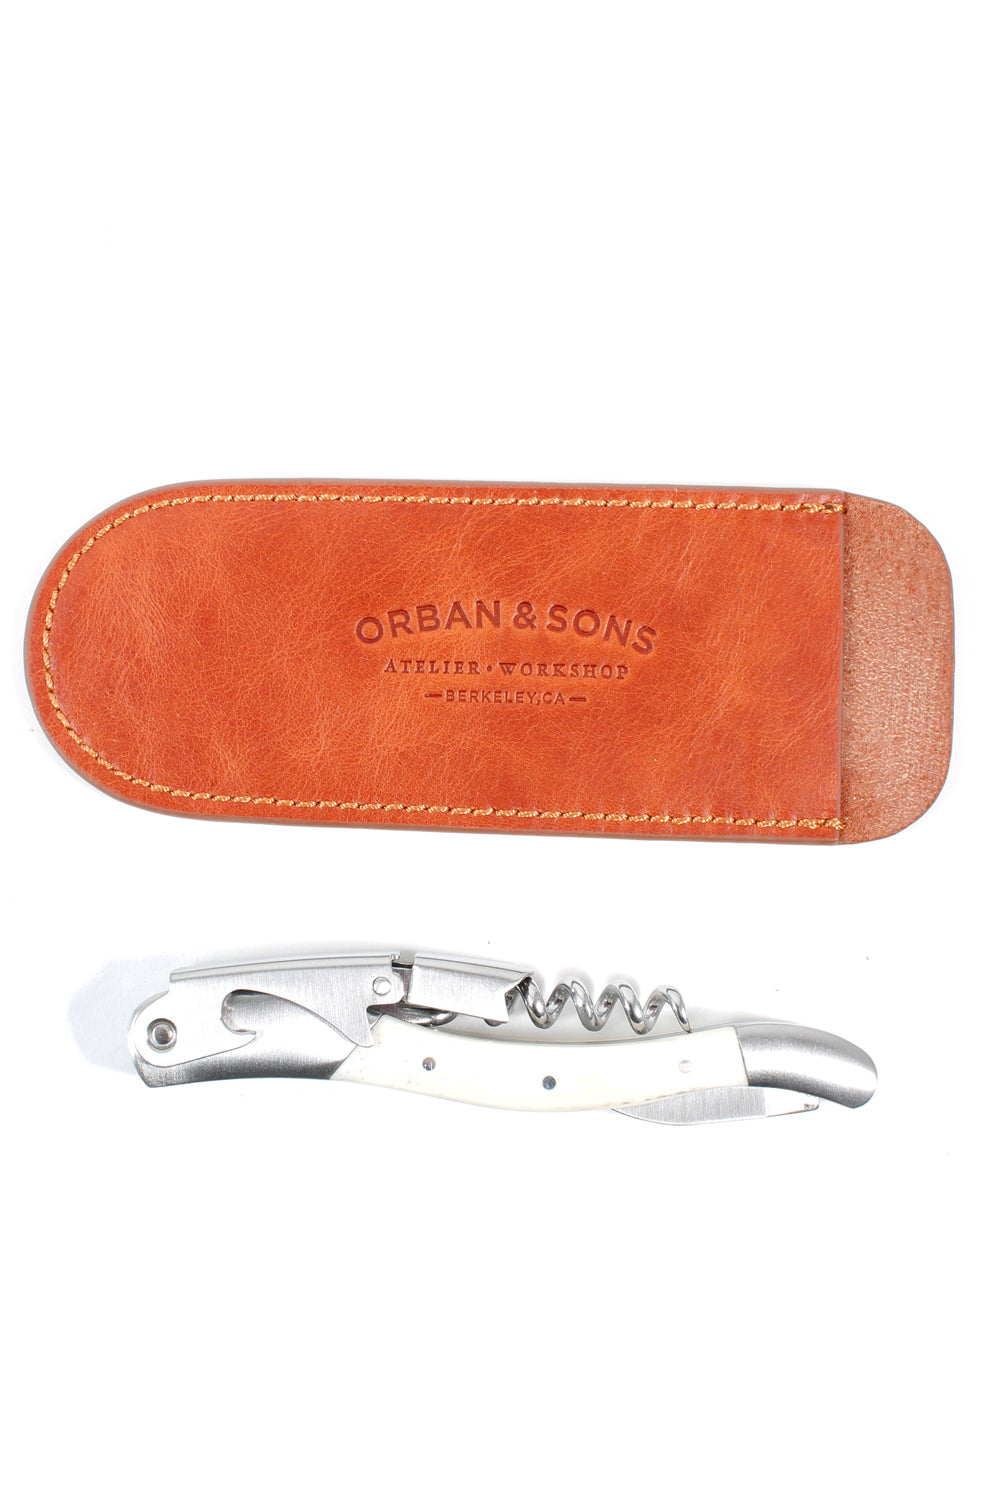 Orban & Sons Small Bone Corkscrew With Leather Pouch Orban & Sons Brand_Orban & Sons Knobs & Pulls Orban & Sons small-bone-corkscrew-with-leather-EDIT